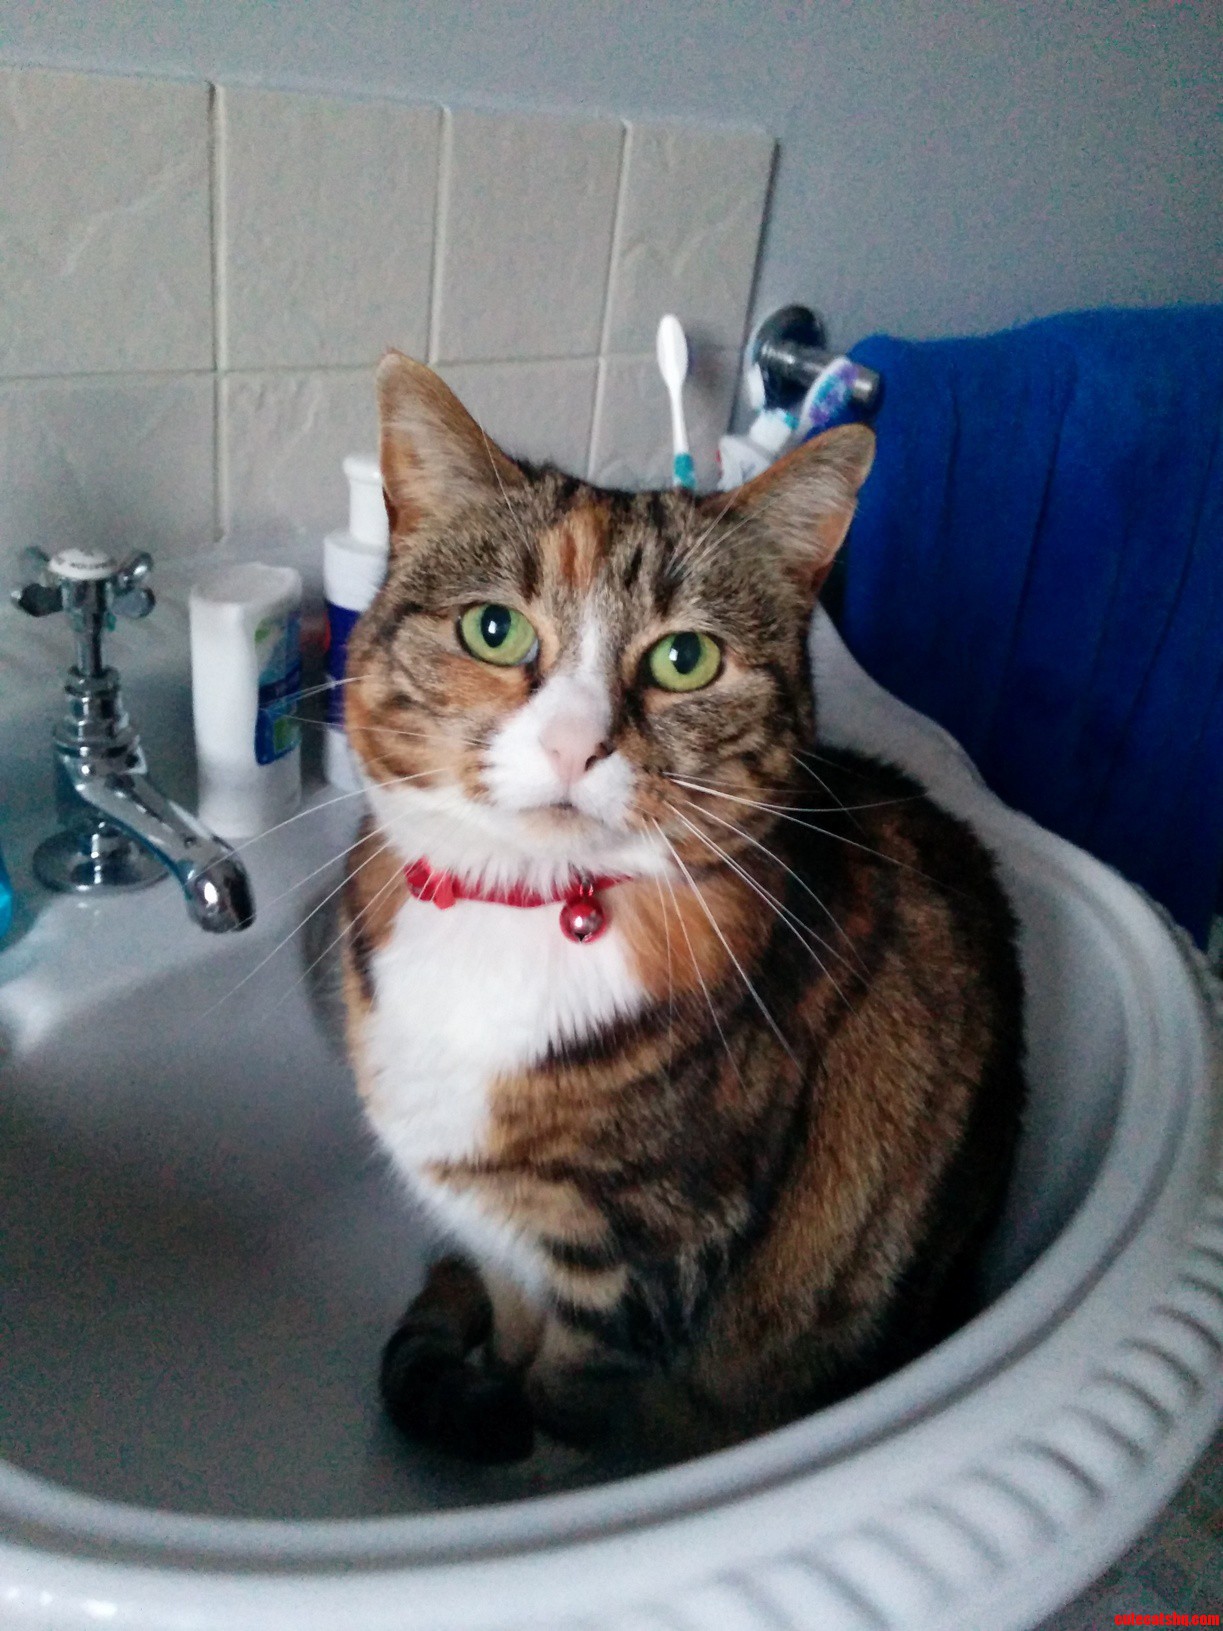 So apparently cats like sinks now.